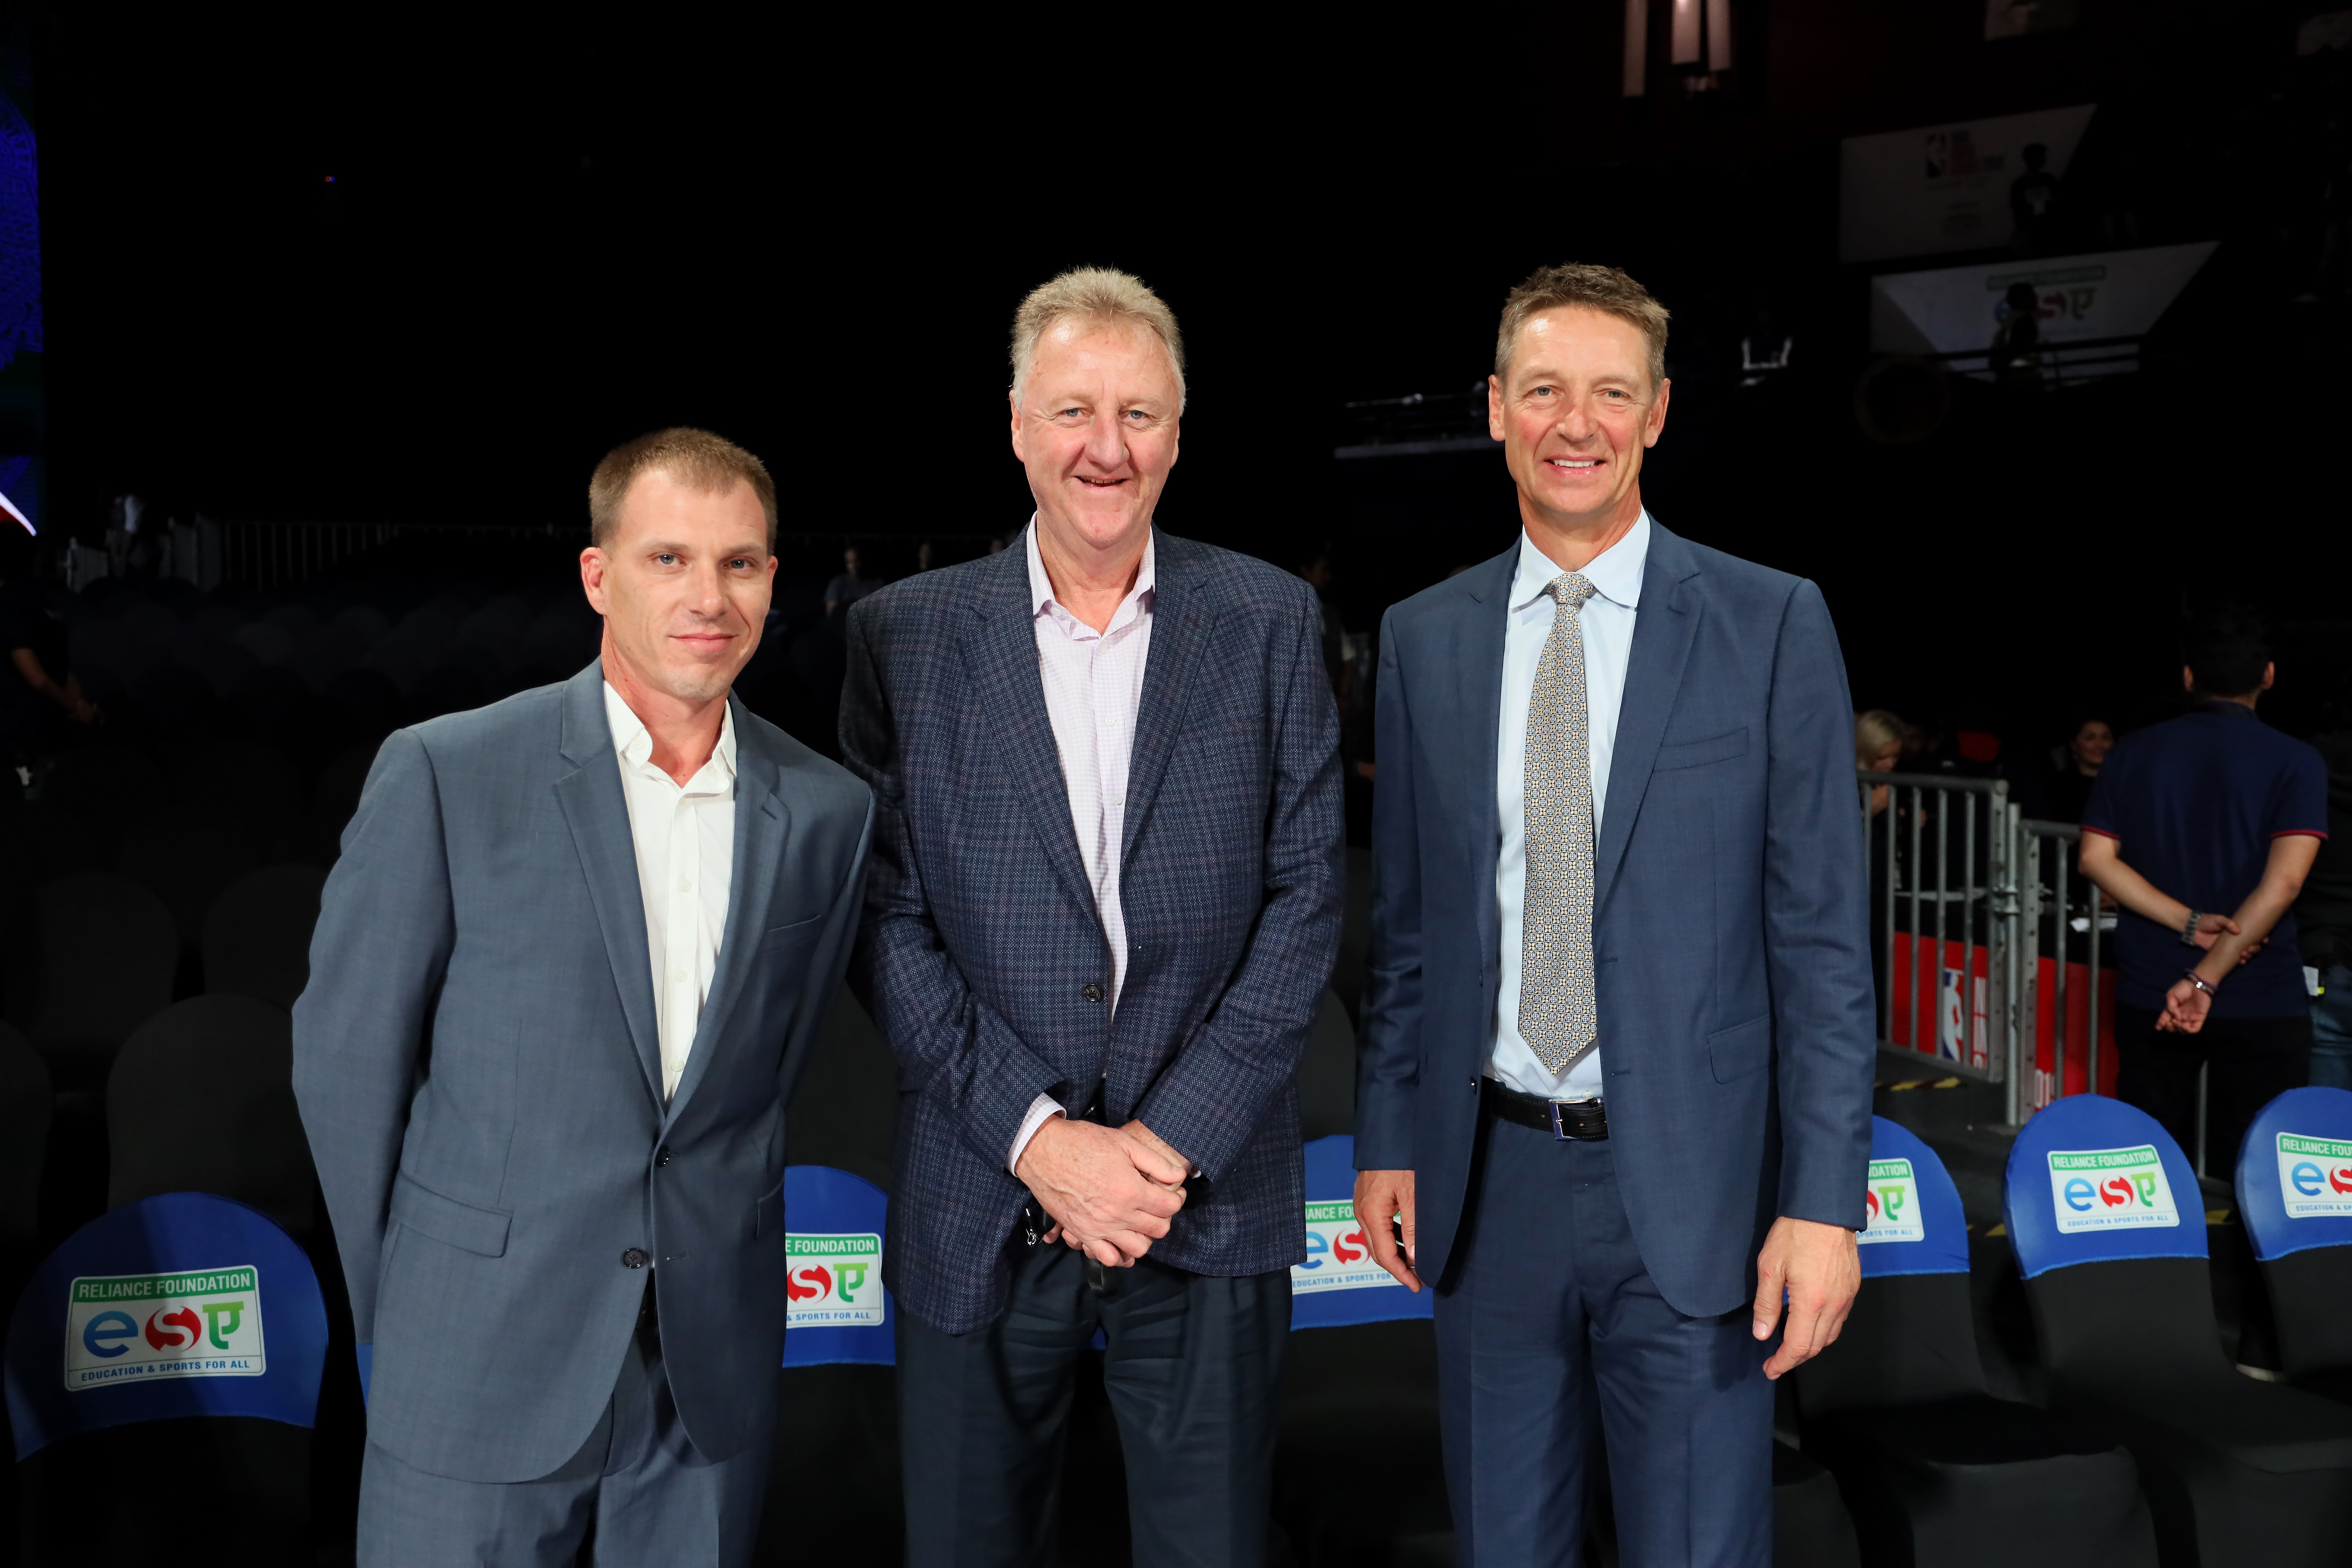 Jason Williams, Larry Bird, and Detlef Schrempf at the NSCI Dome in Mumbai, India on October 4, 2019 | Source: Getty Images